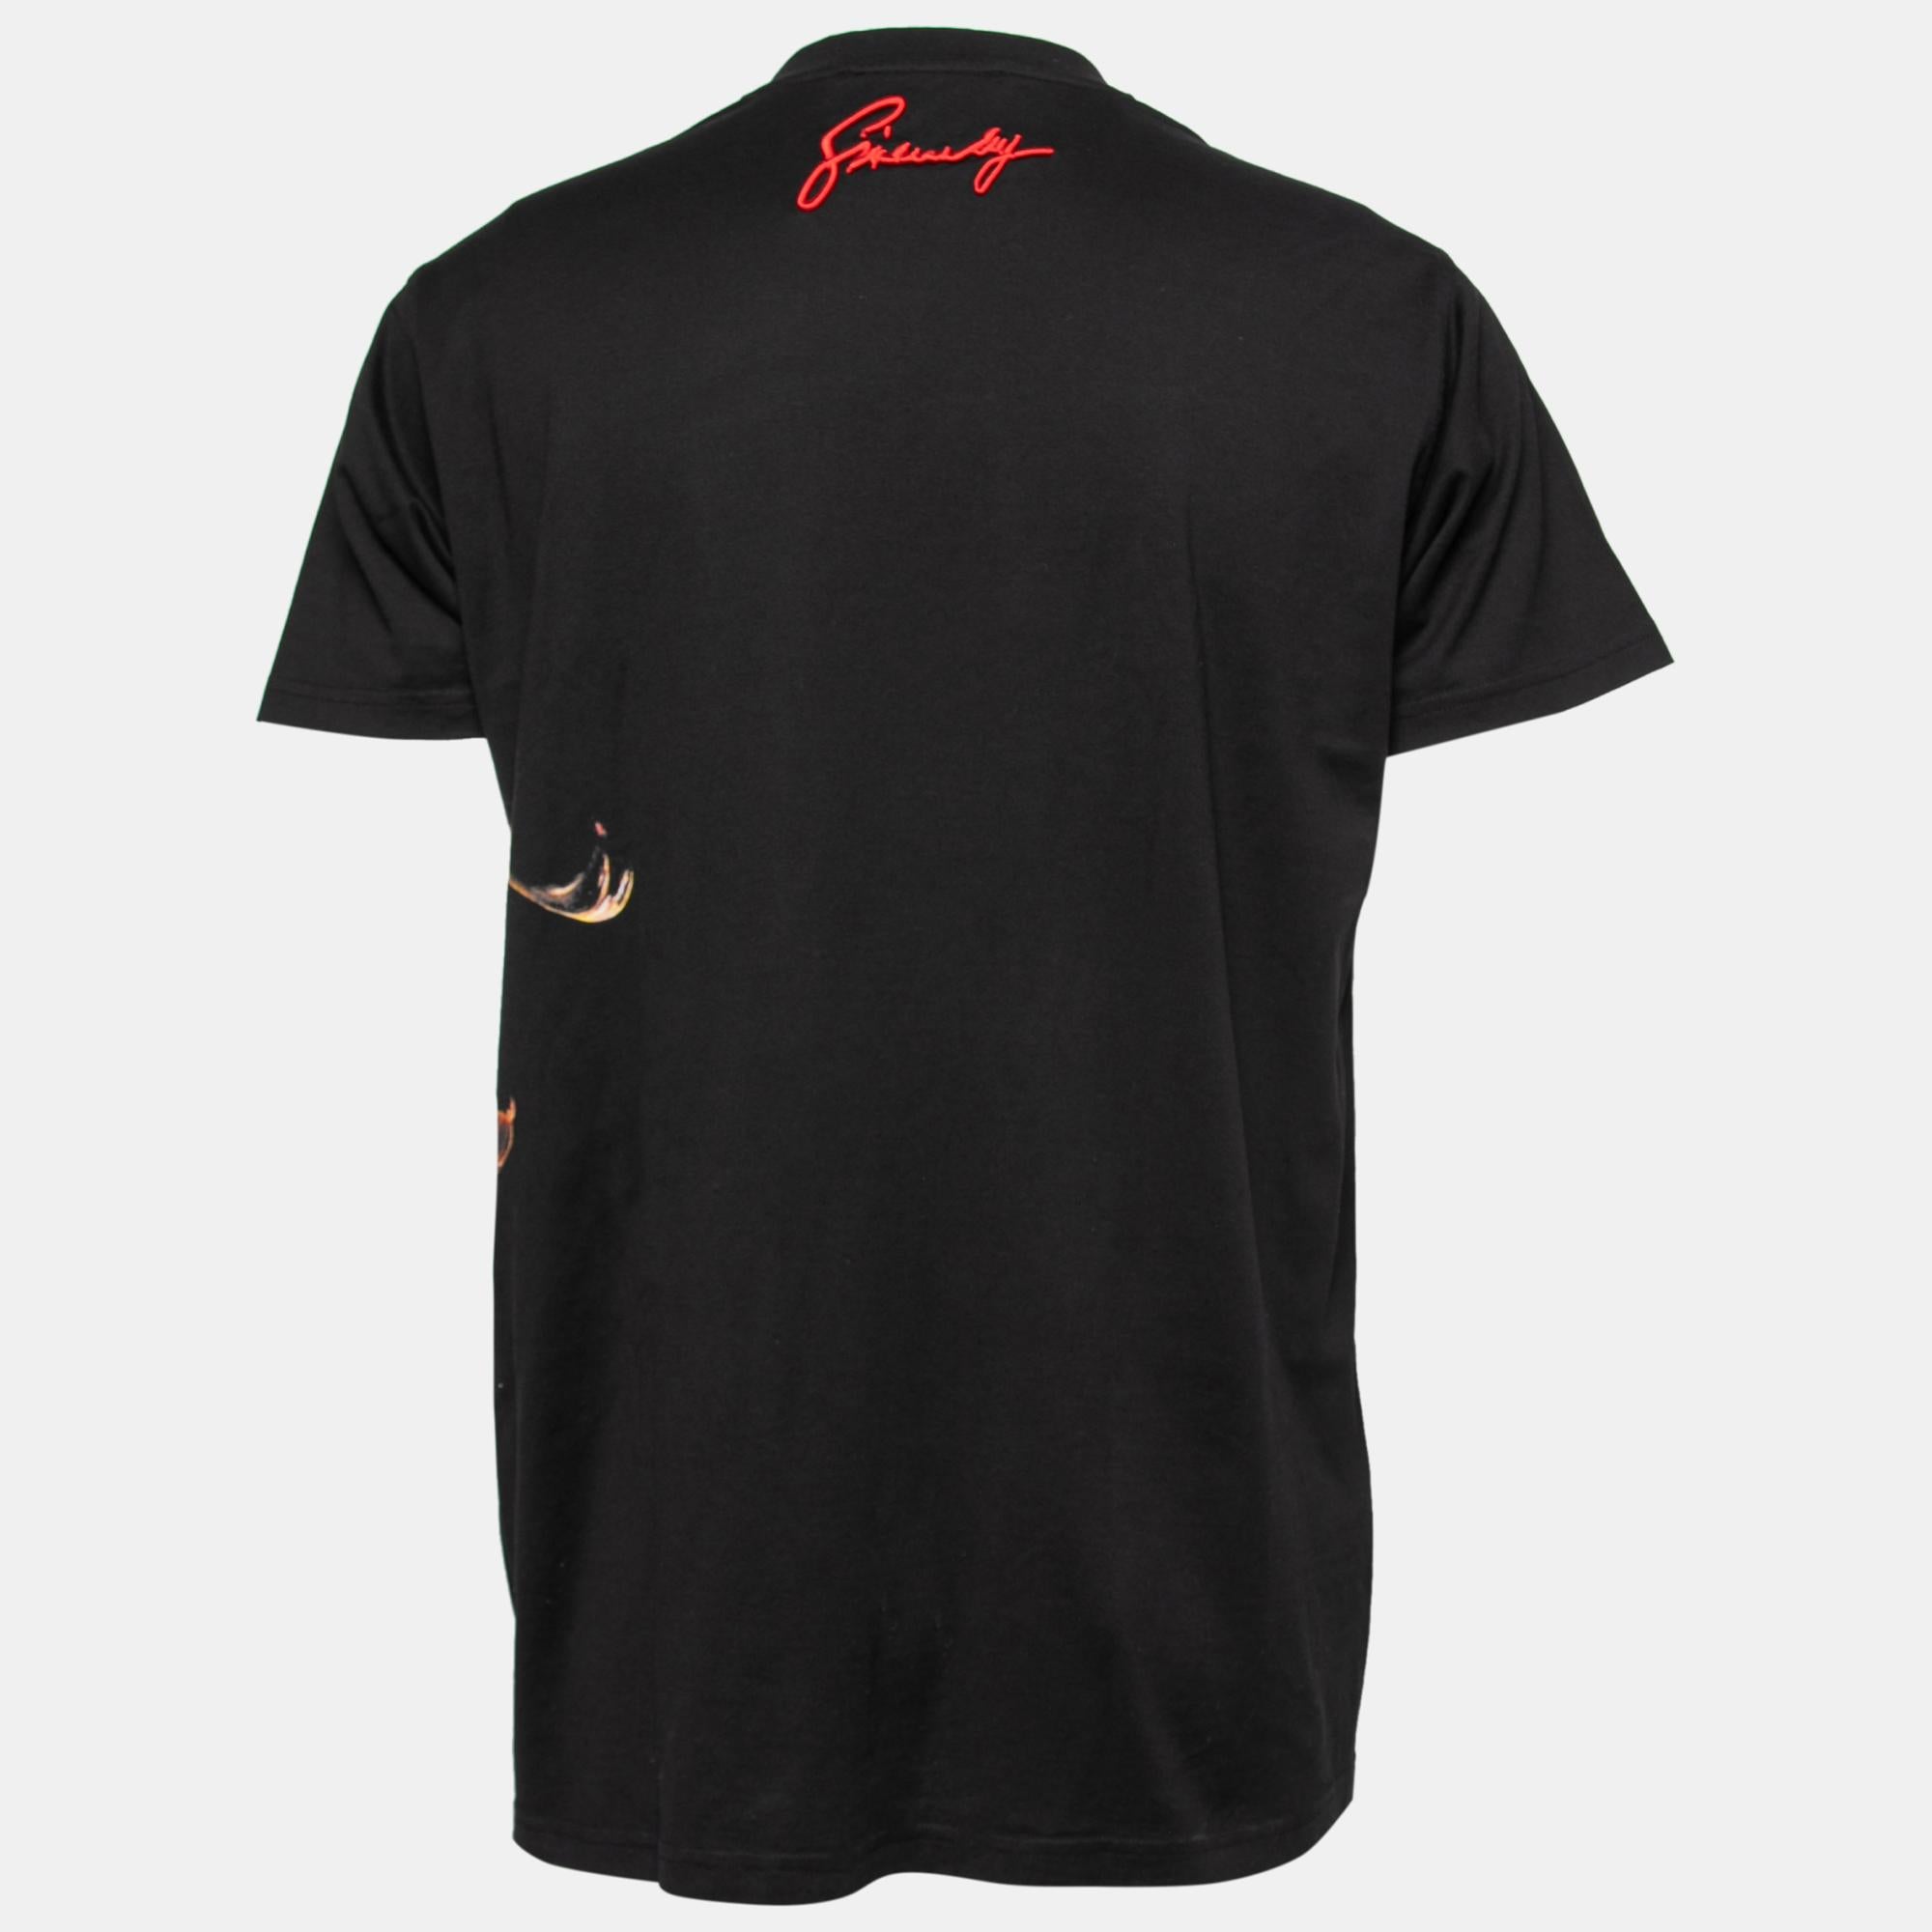 Givenchy brings you a simple t-shirt elevated by a lion print on the front and the label's name on the back. It has been tailored from cotton in a black shade and features short sleeves. Style the creation with sneakers and denim pants for a cool